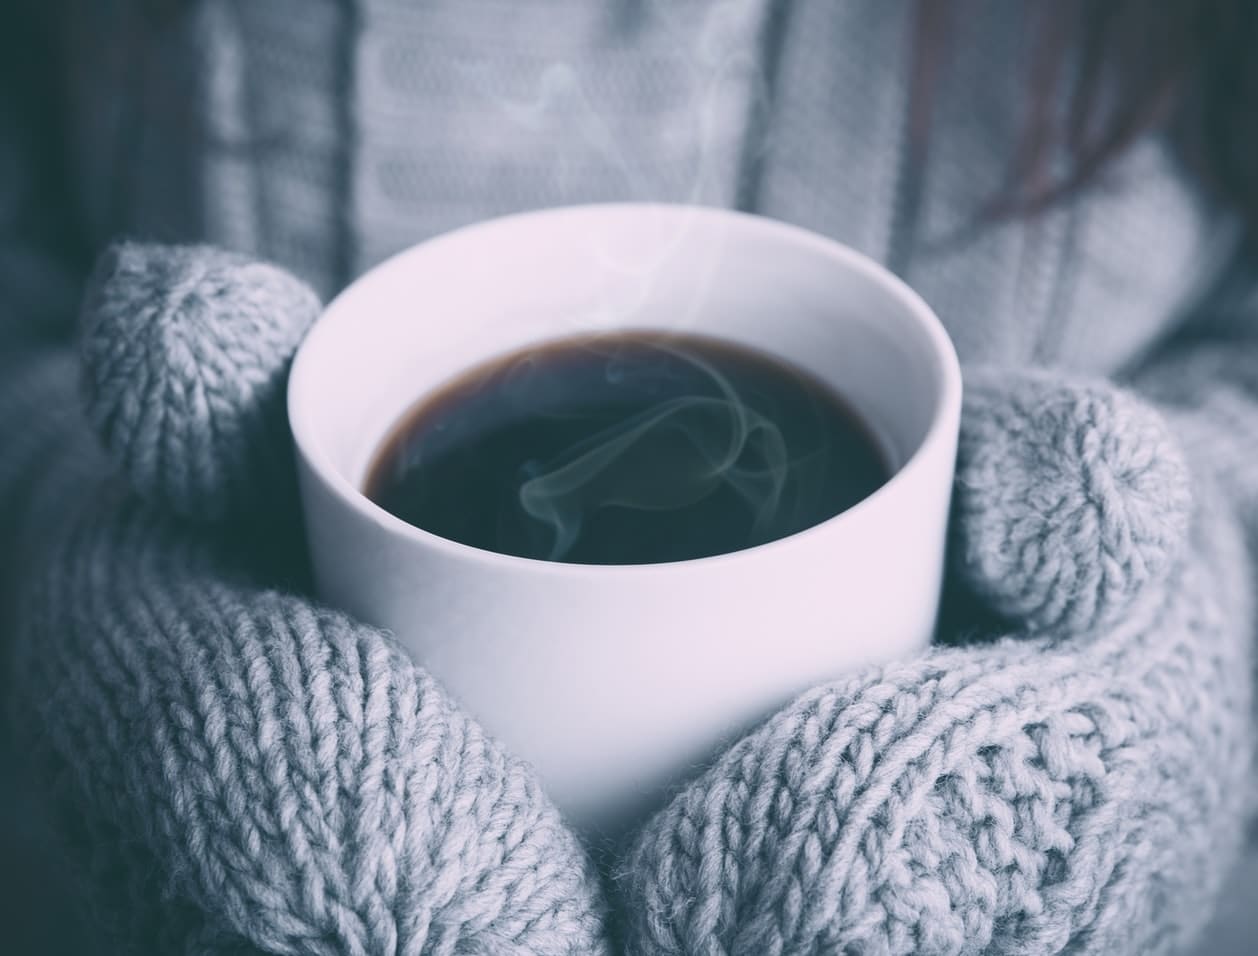 person wearing mittens holding a hot drink